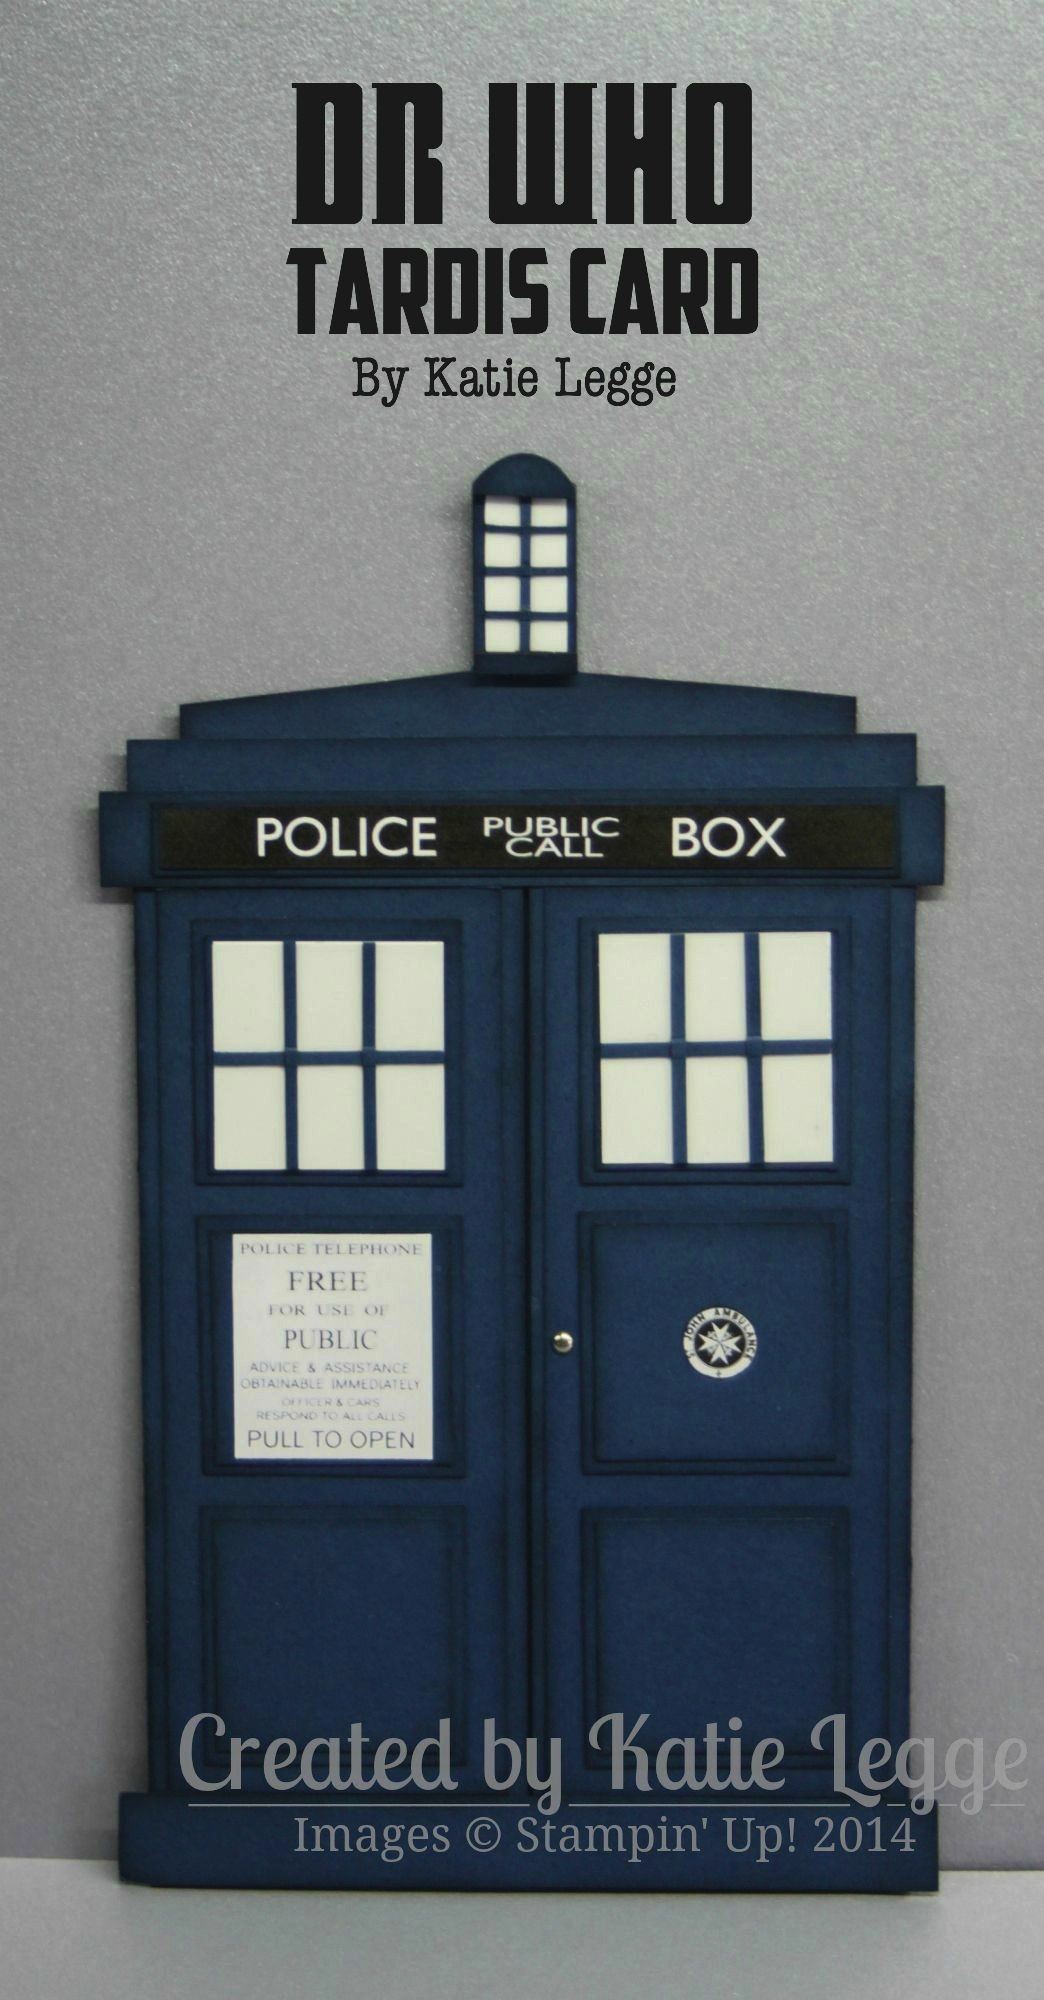 Dr who Papercraft Dr who Tardis Card Cards Pinterest